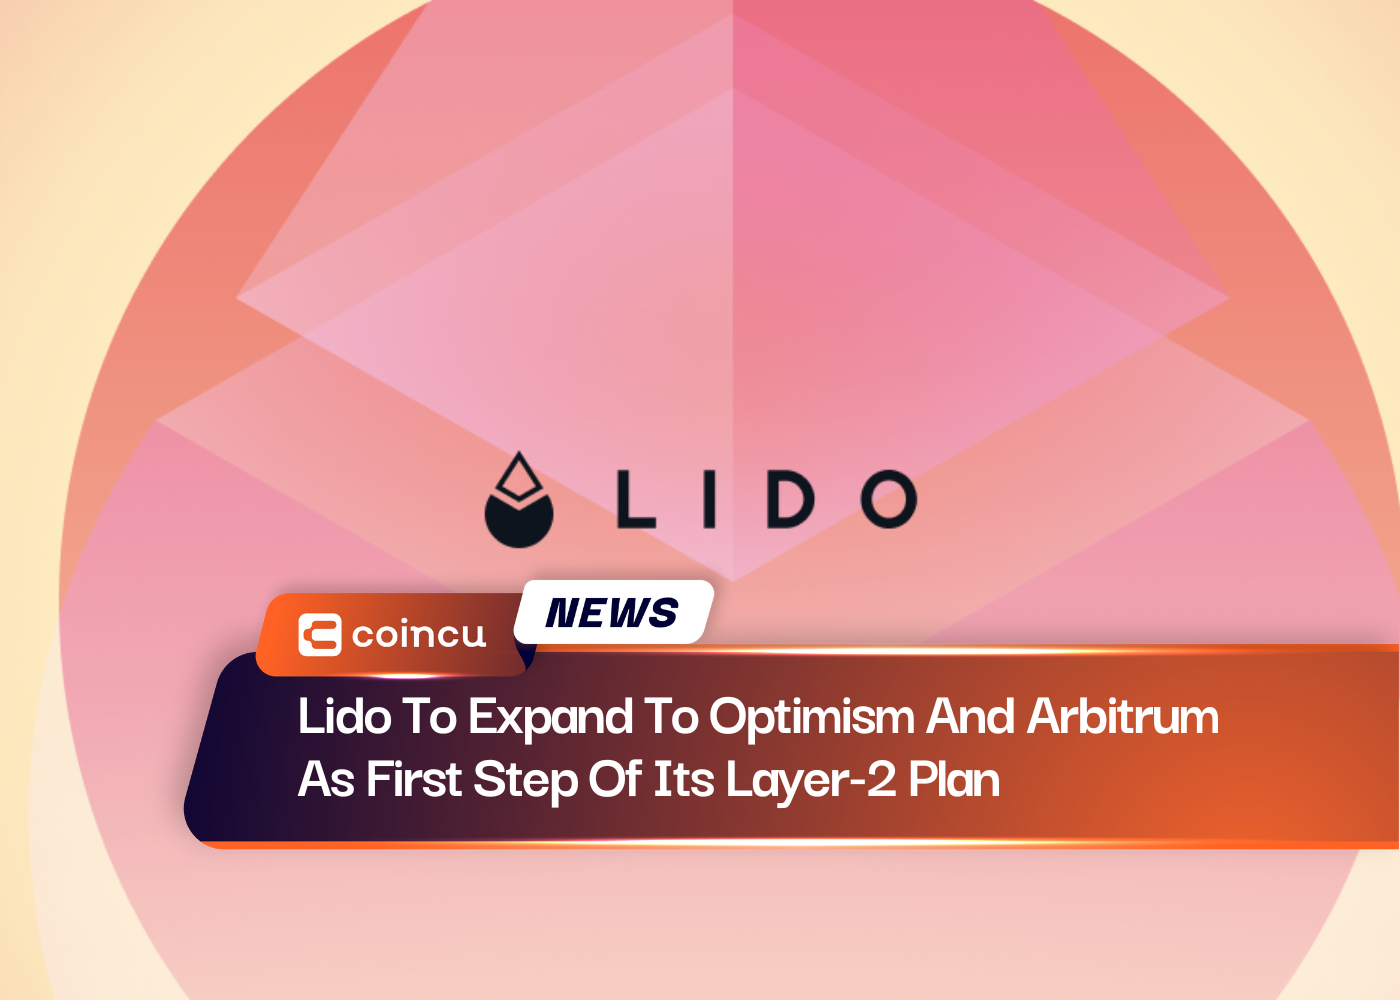 Lido To Expand To Optimism And Arbitrum As First Step Of Its Layer-2 Plan